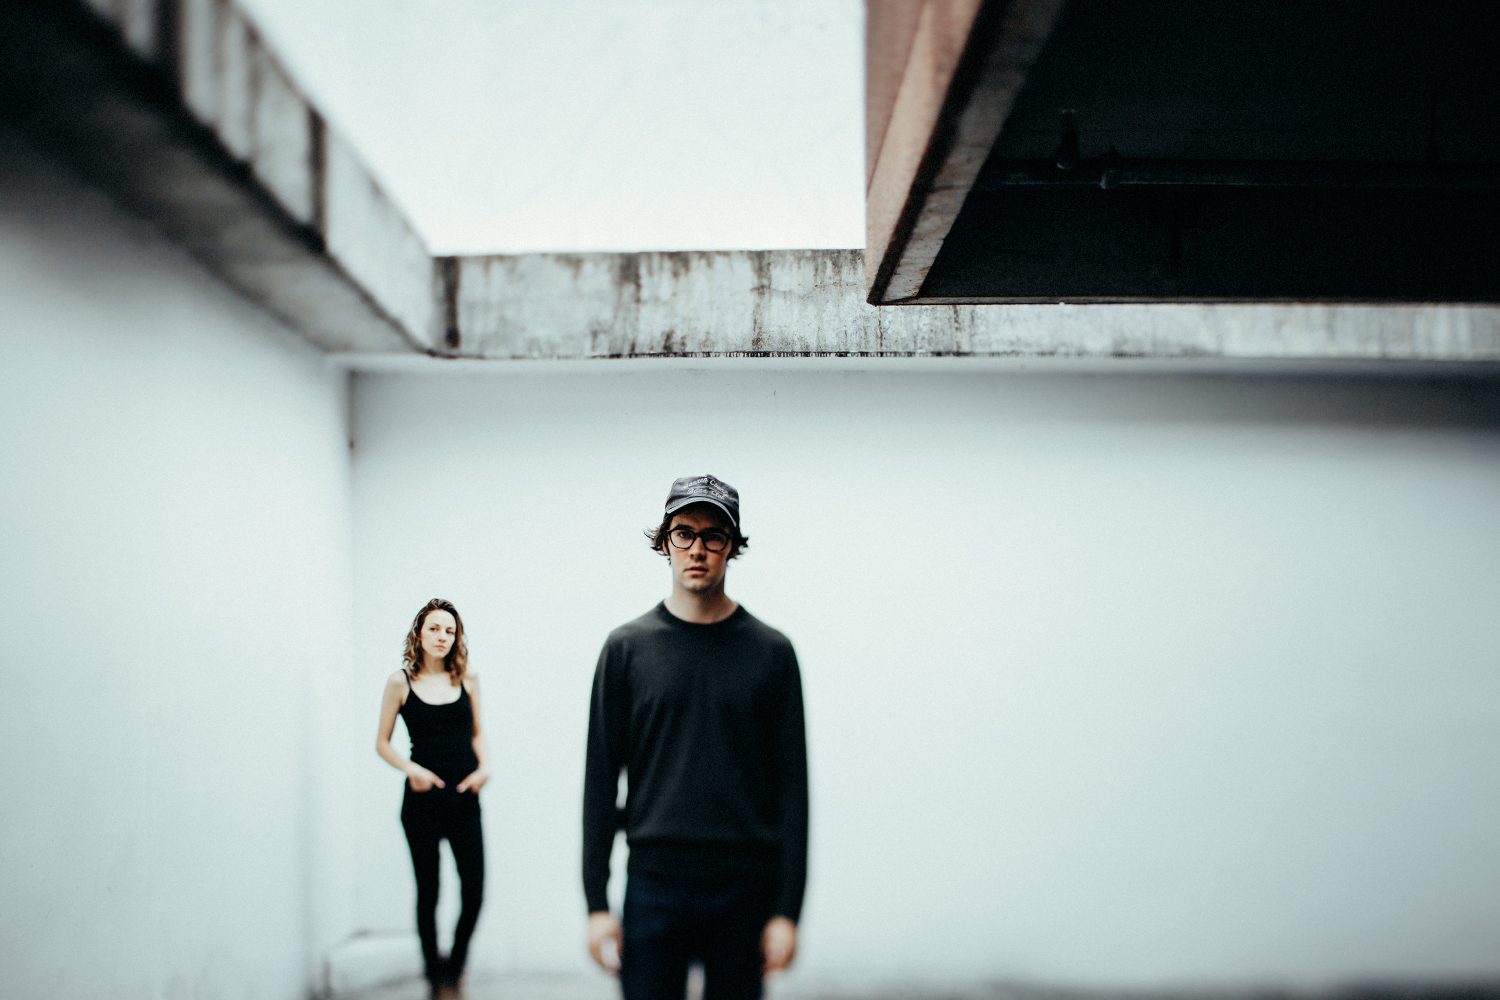 Mandolin Orange return to The Netherlands in February: shows announced today